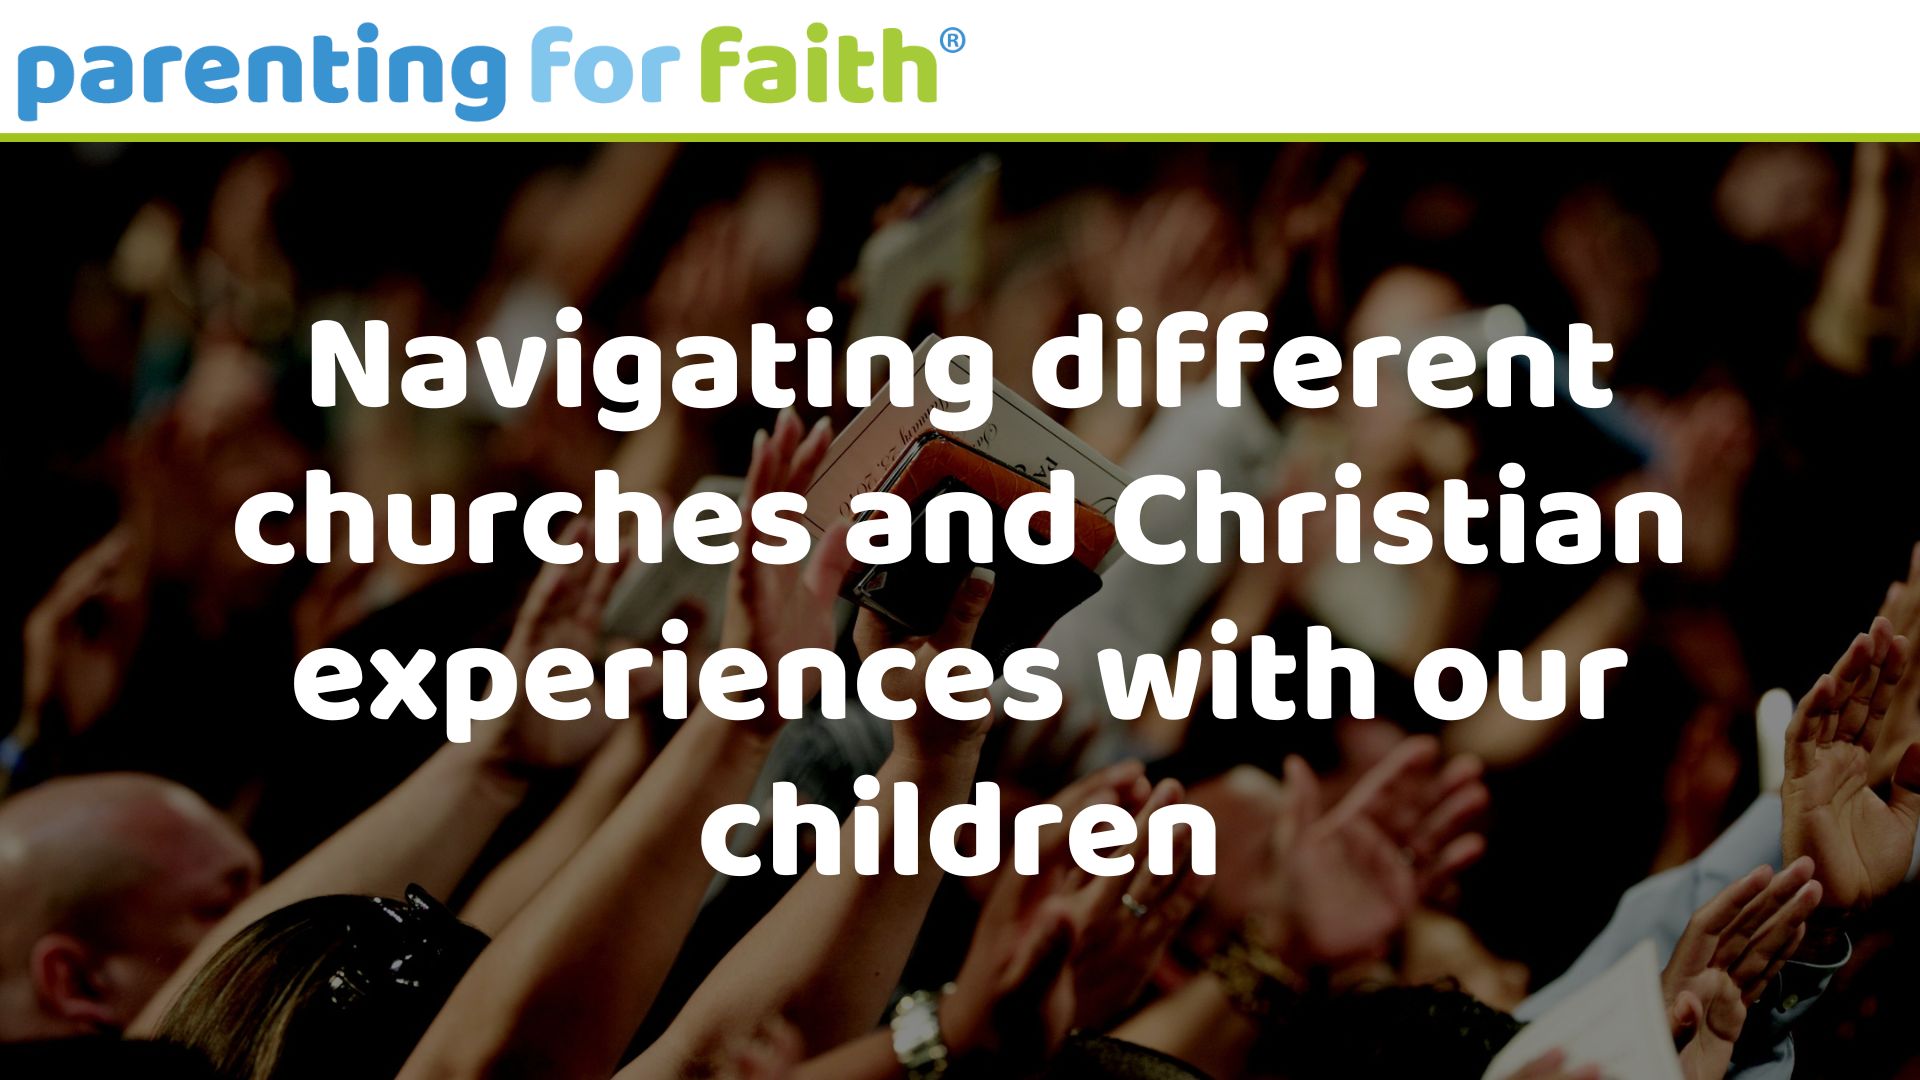 Navigating different churches and Christian experiences with our children image credit jaefrench from Pixabay